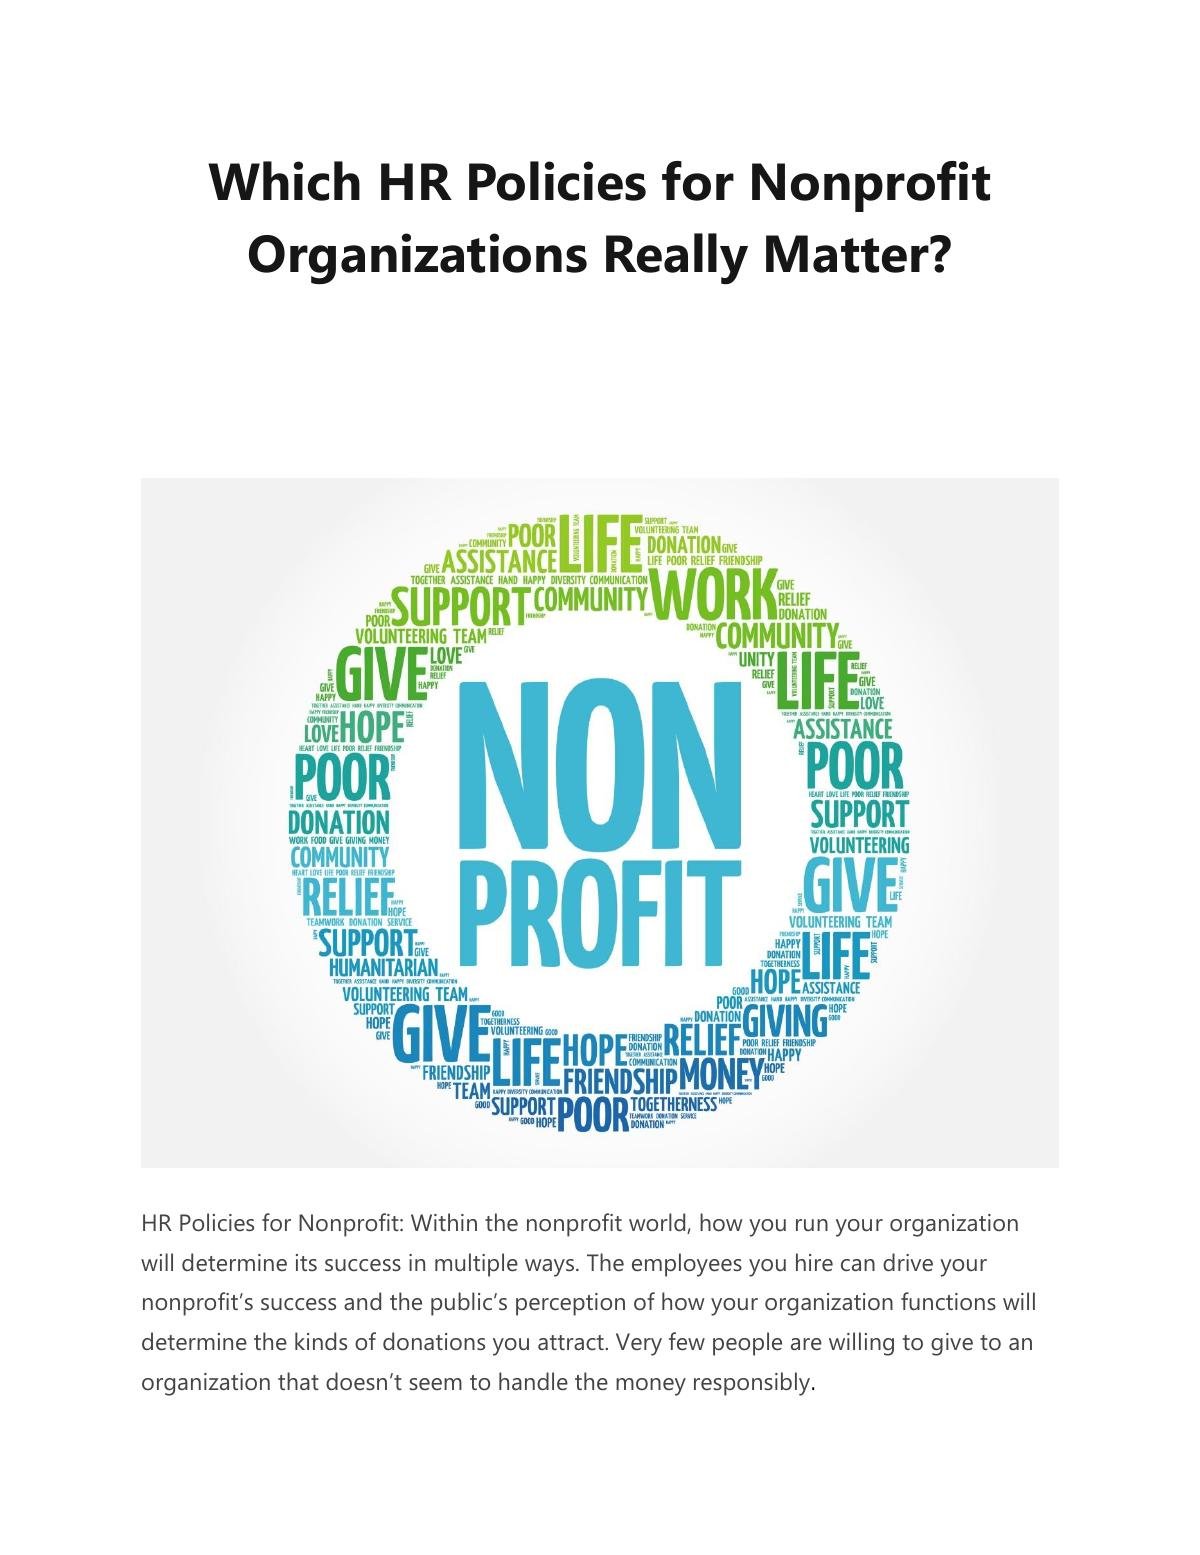 Which HR Policies for Nonprofit Organizations Really Matter?